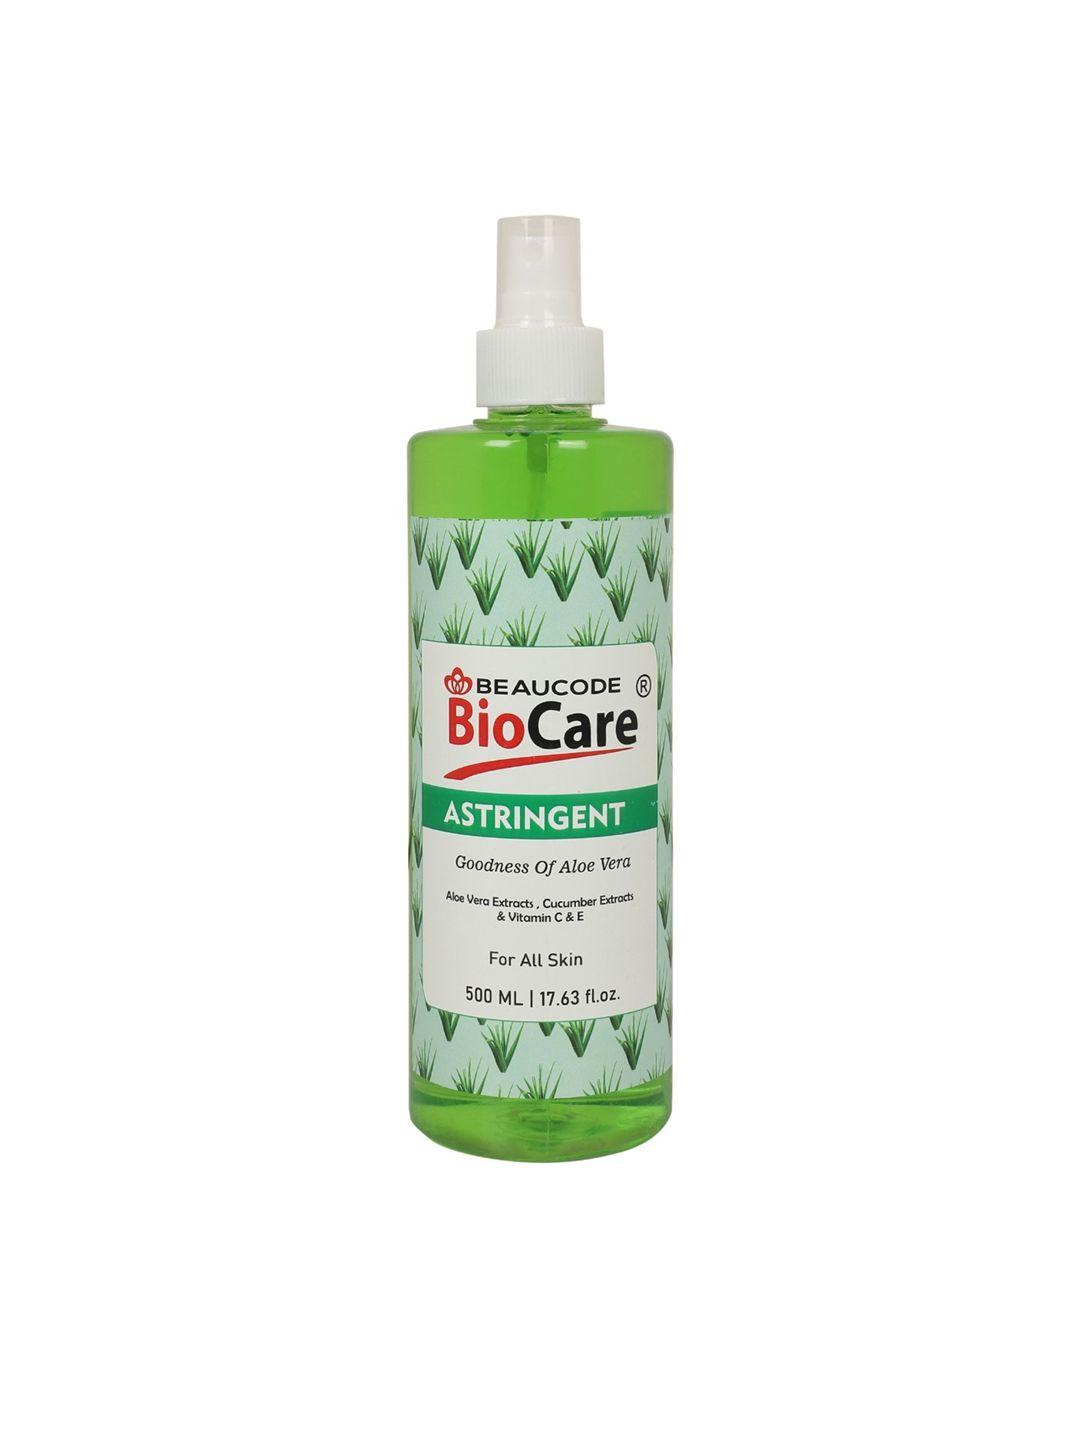 beaucode biocare astringent with aloe vera & cucumber extracts - 500ml